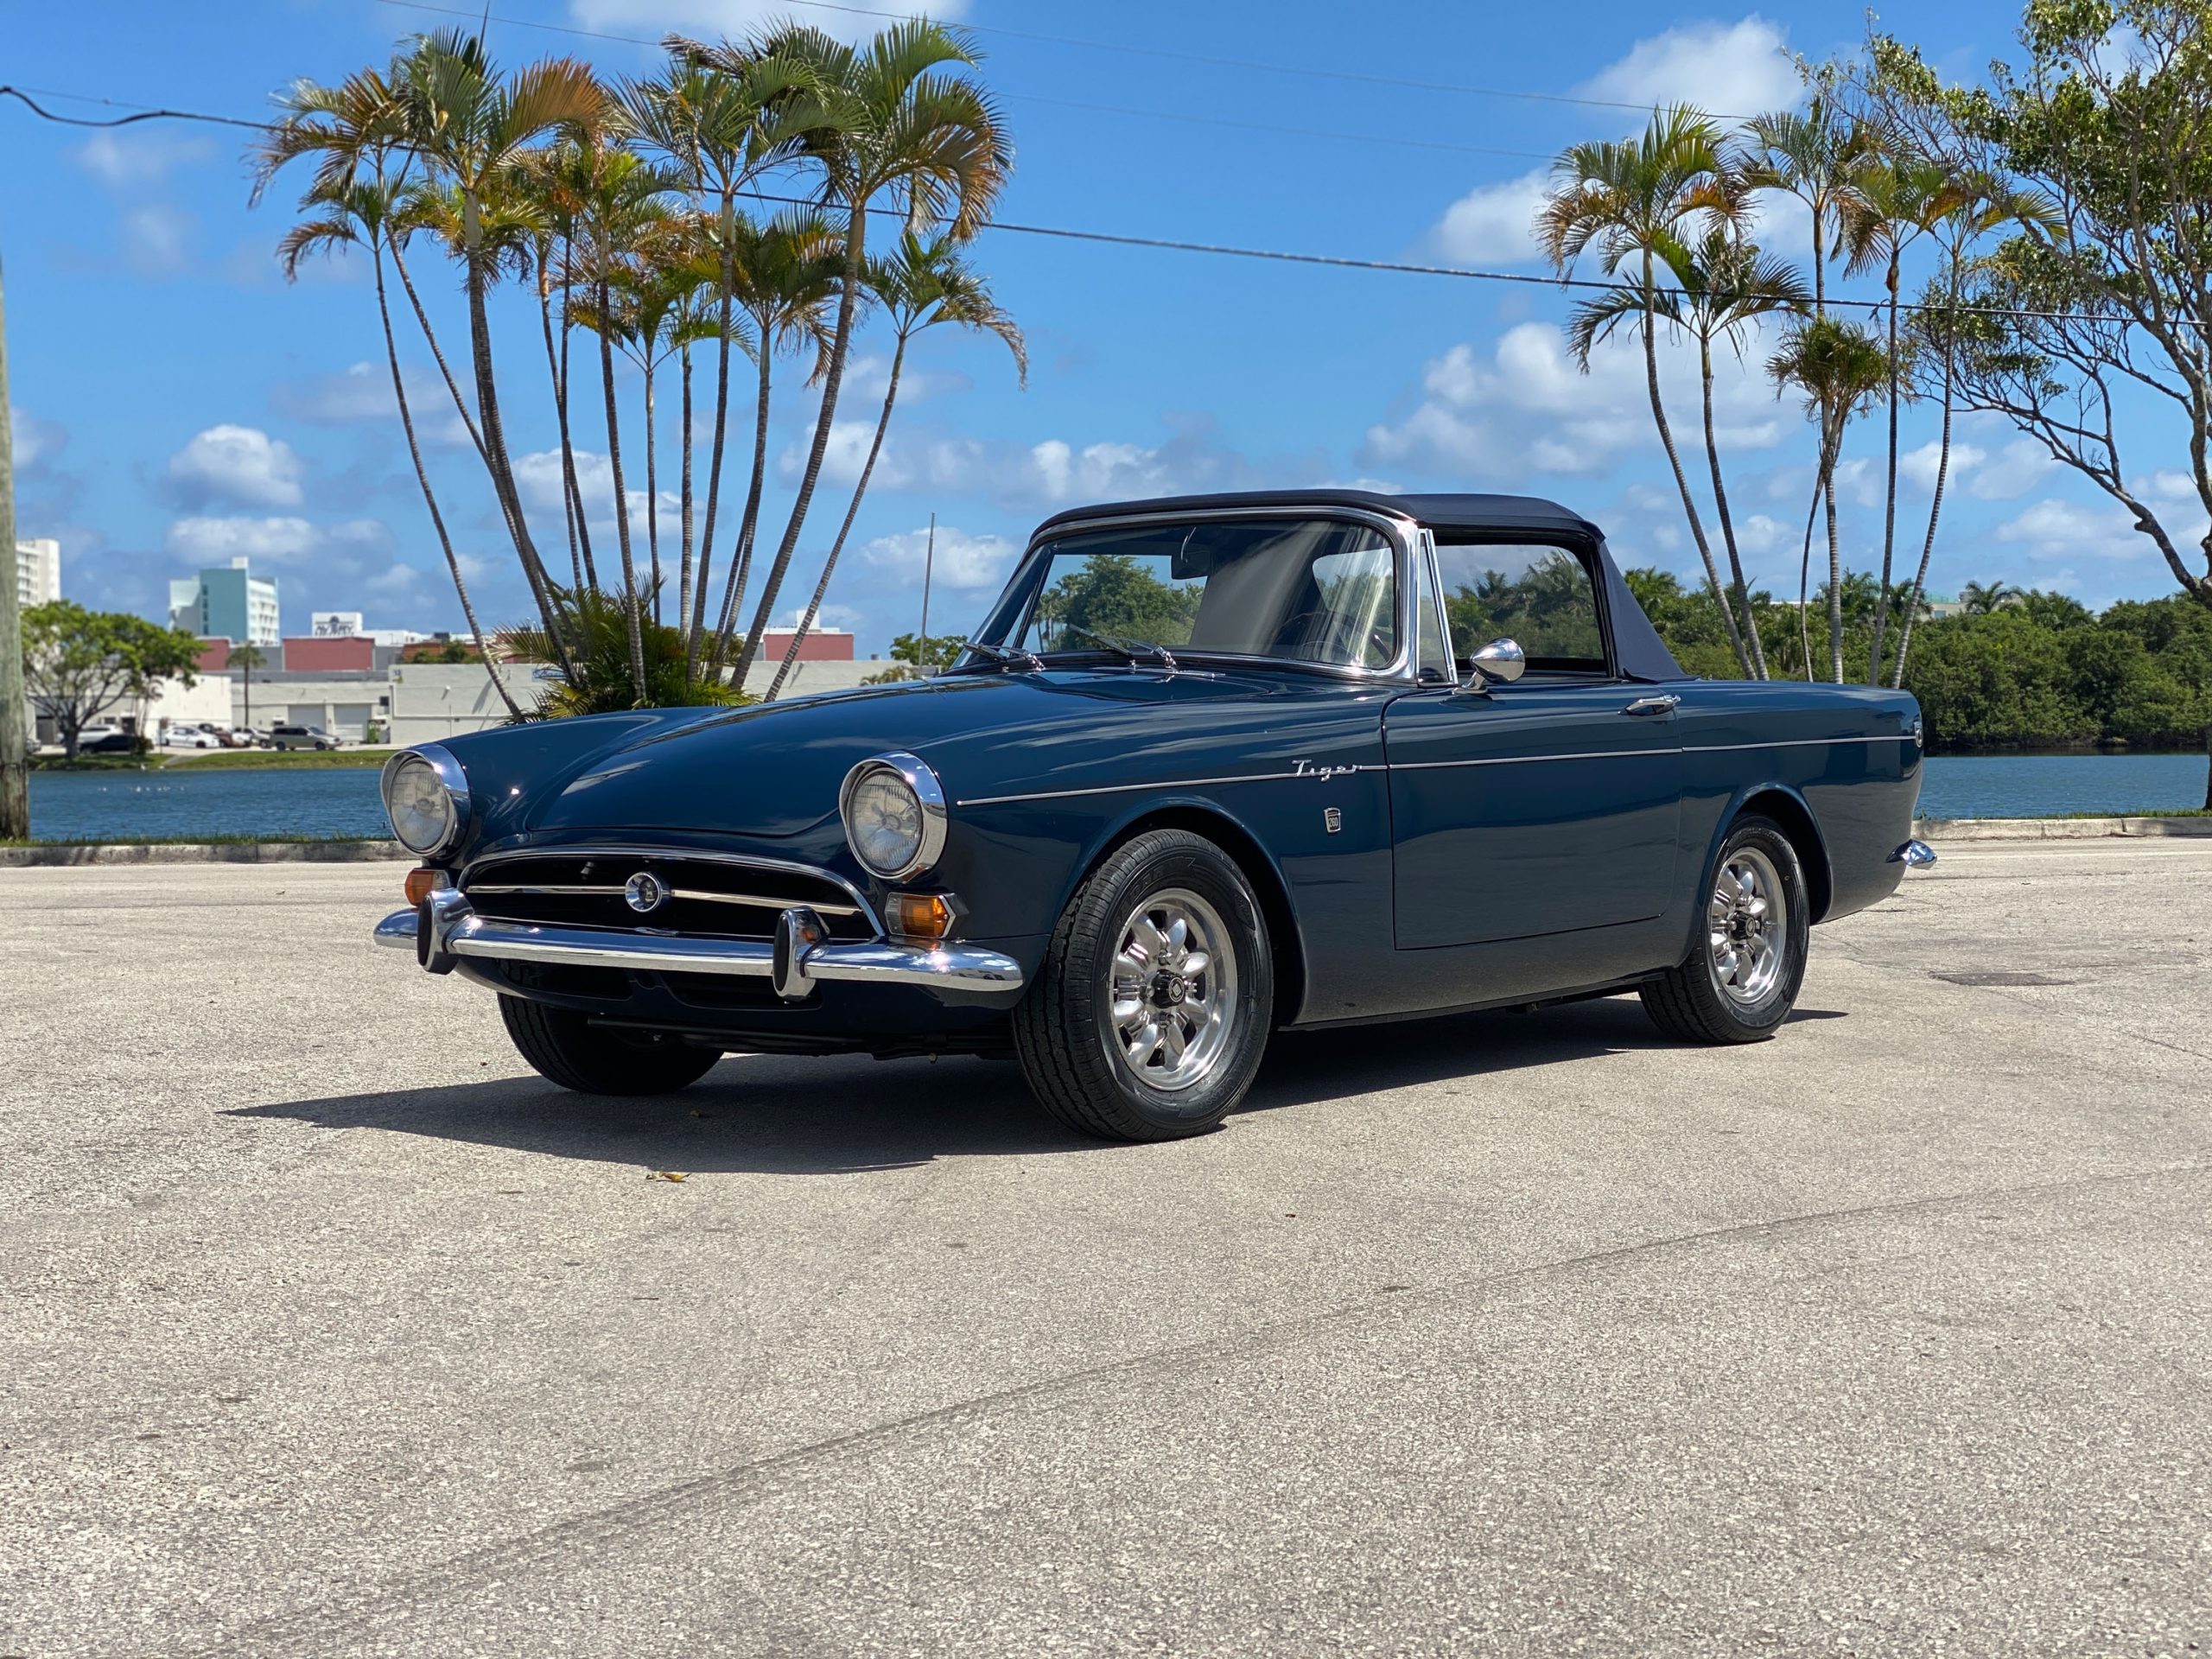 Car Of The Day: 1964 Sunbeam Tiger